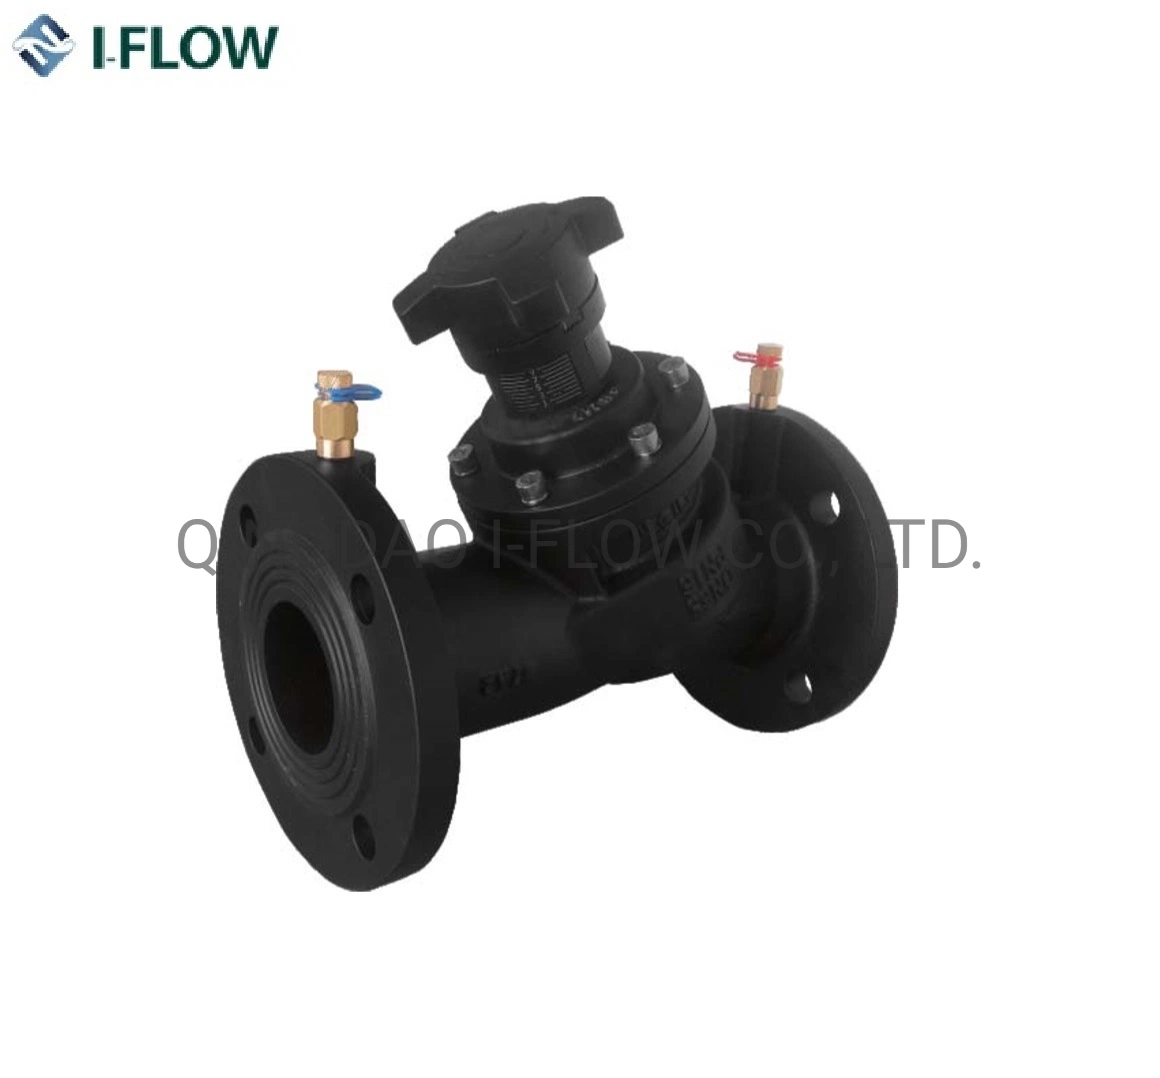 HVAC System Flanged Connection Cast Iron Static Balancing Valve